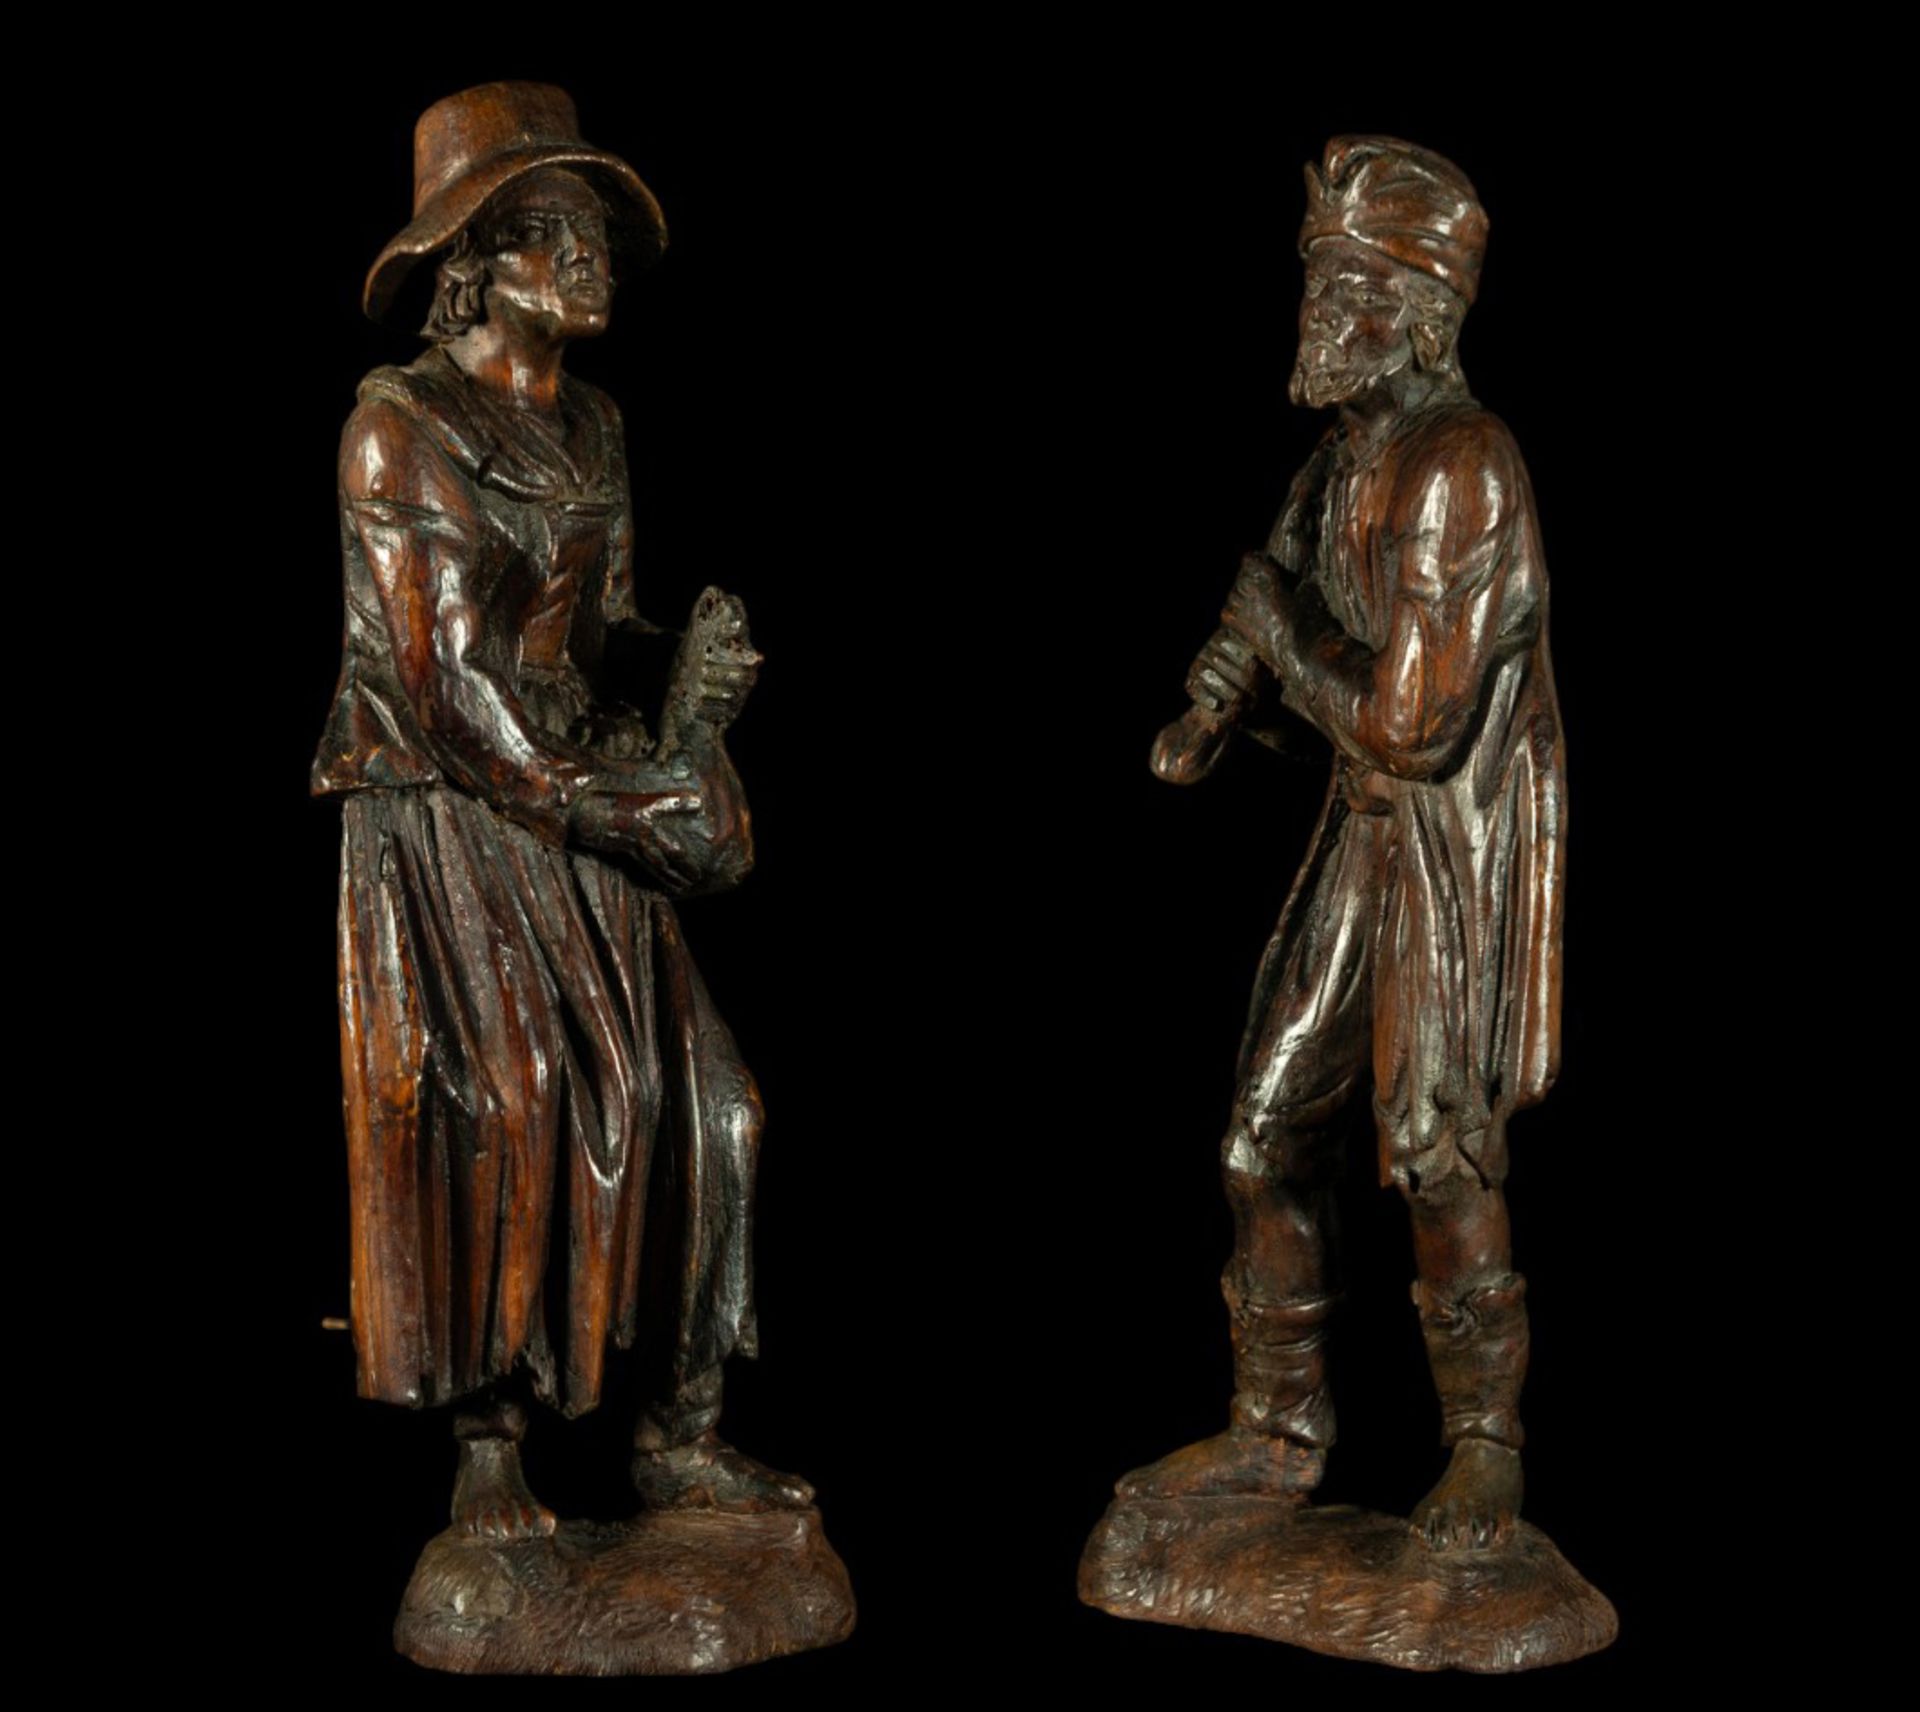 Rare pair of 18th century German Black Forest Beggars, Simon Trojer (manner of) - Image 4 of 5